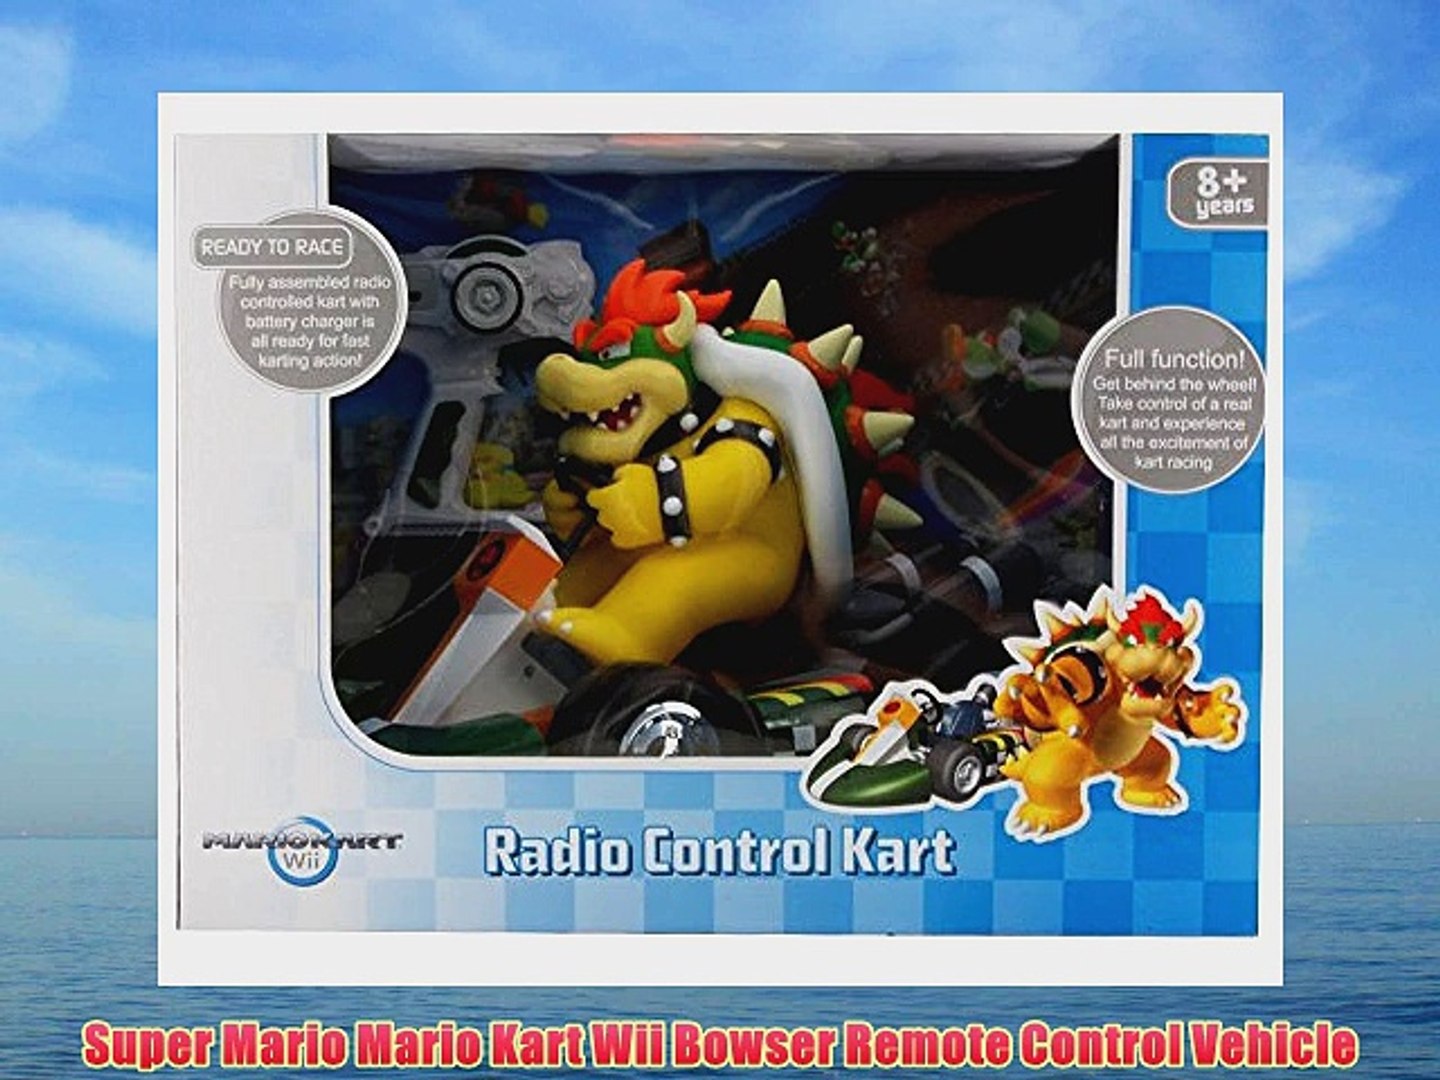 Super Mario Mario Kart Wii Bowser Remote Control Vehicle Video Dailymotion